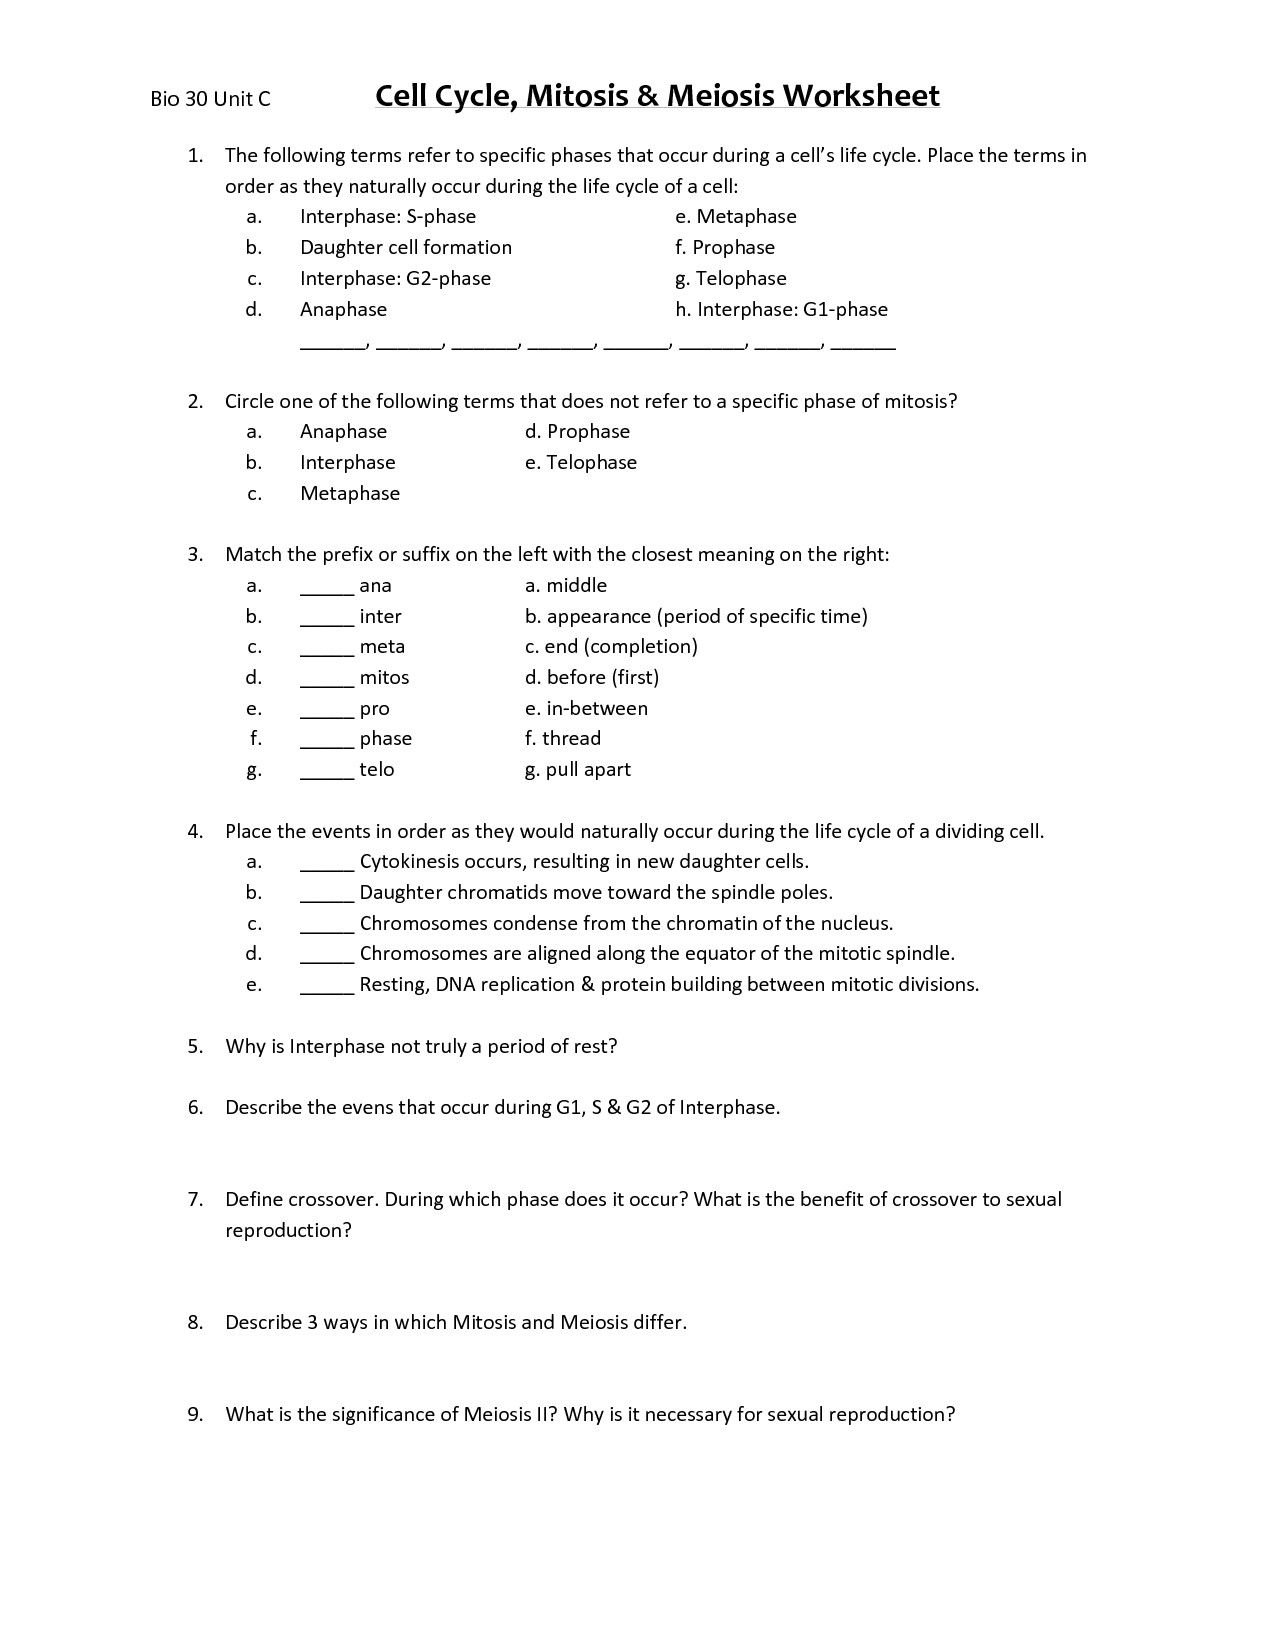 Congress In A Flash Worksheet Answers Key Icivics  Briefencounters Regarding Congress In A Flash Worksheet Answers